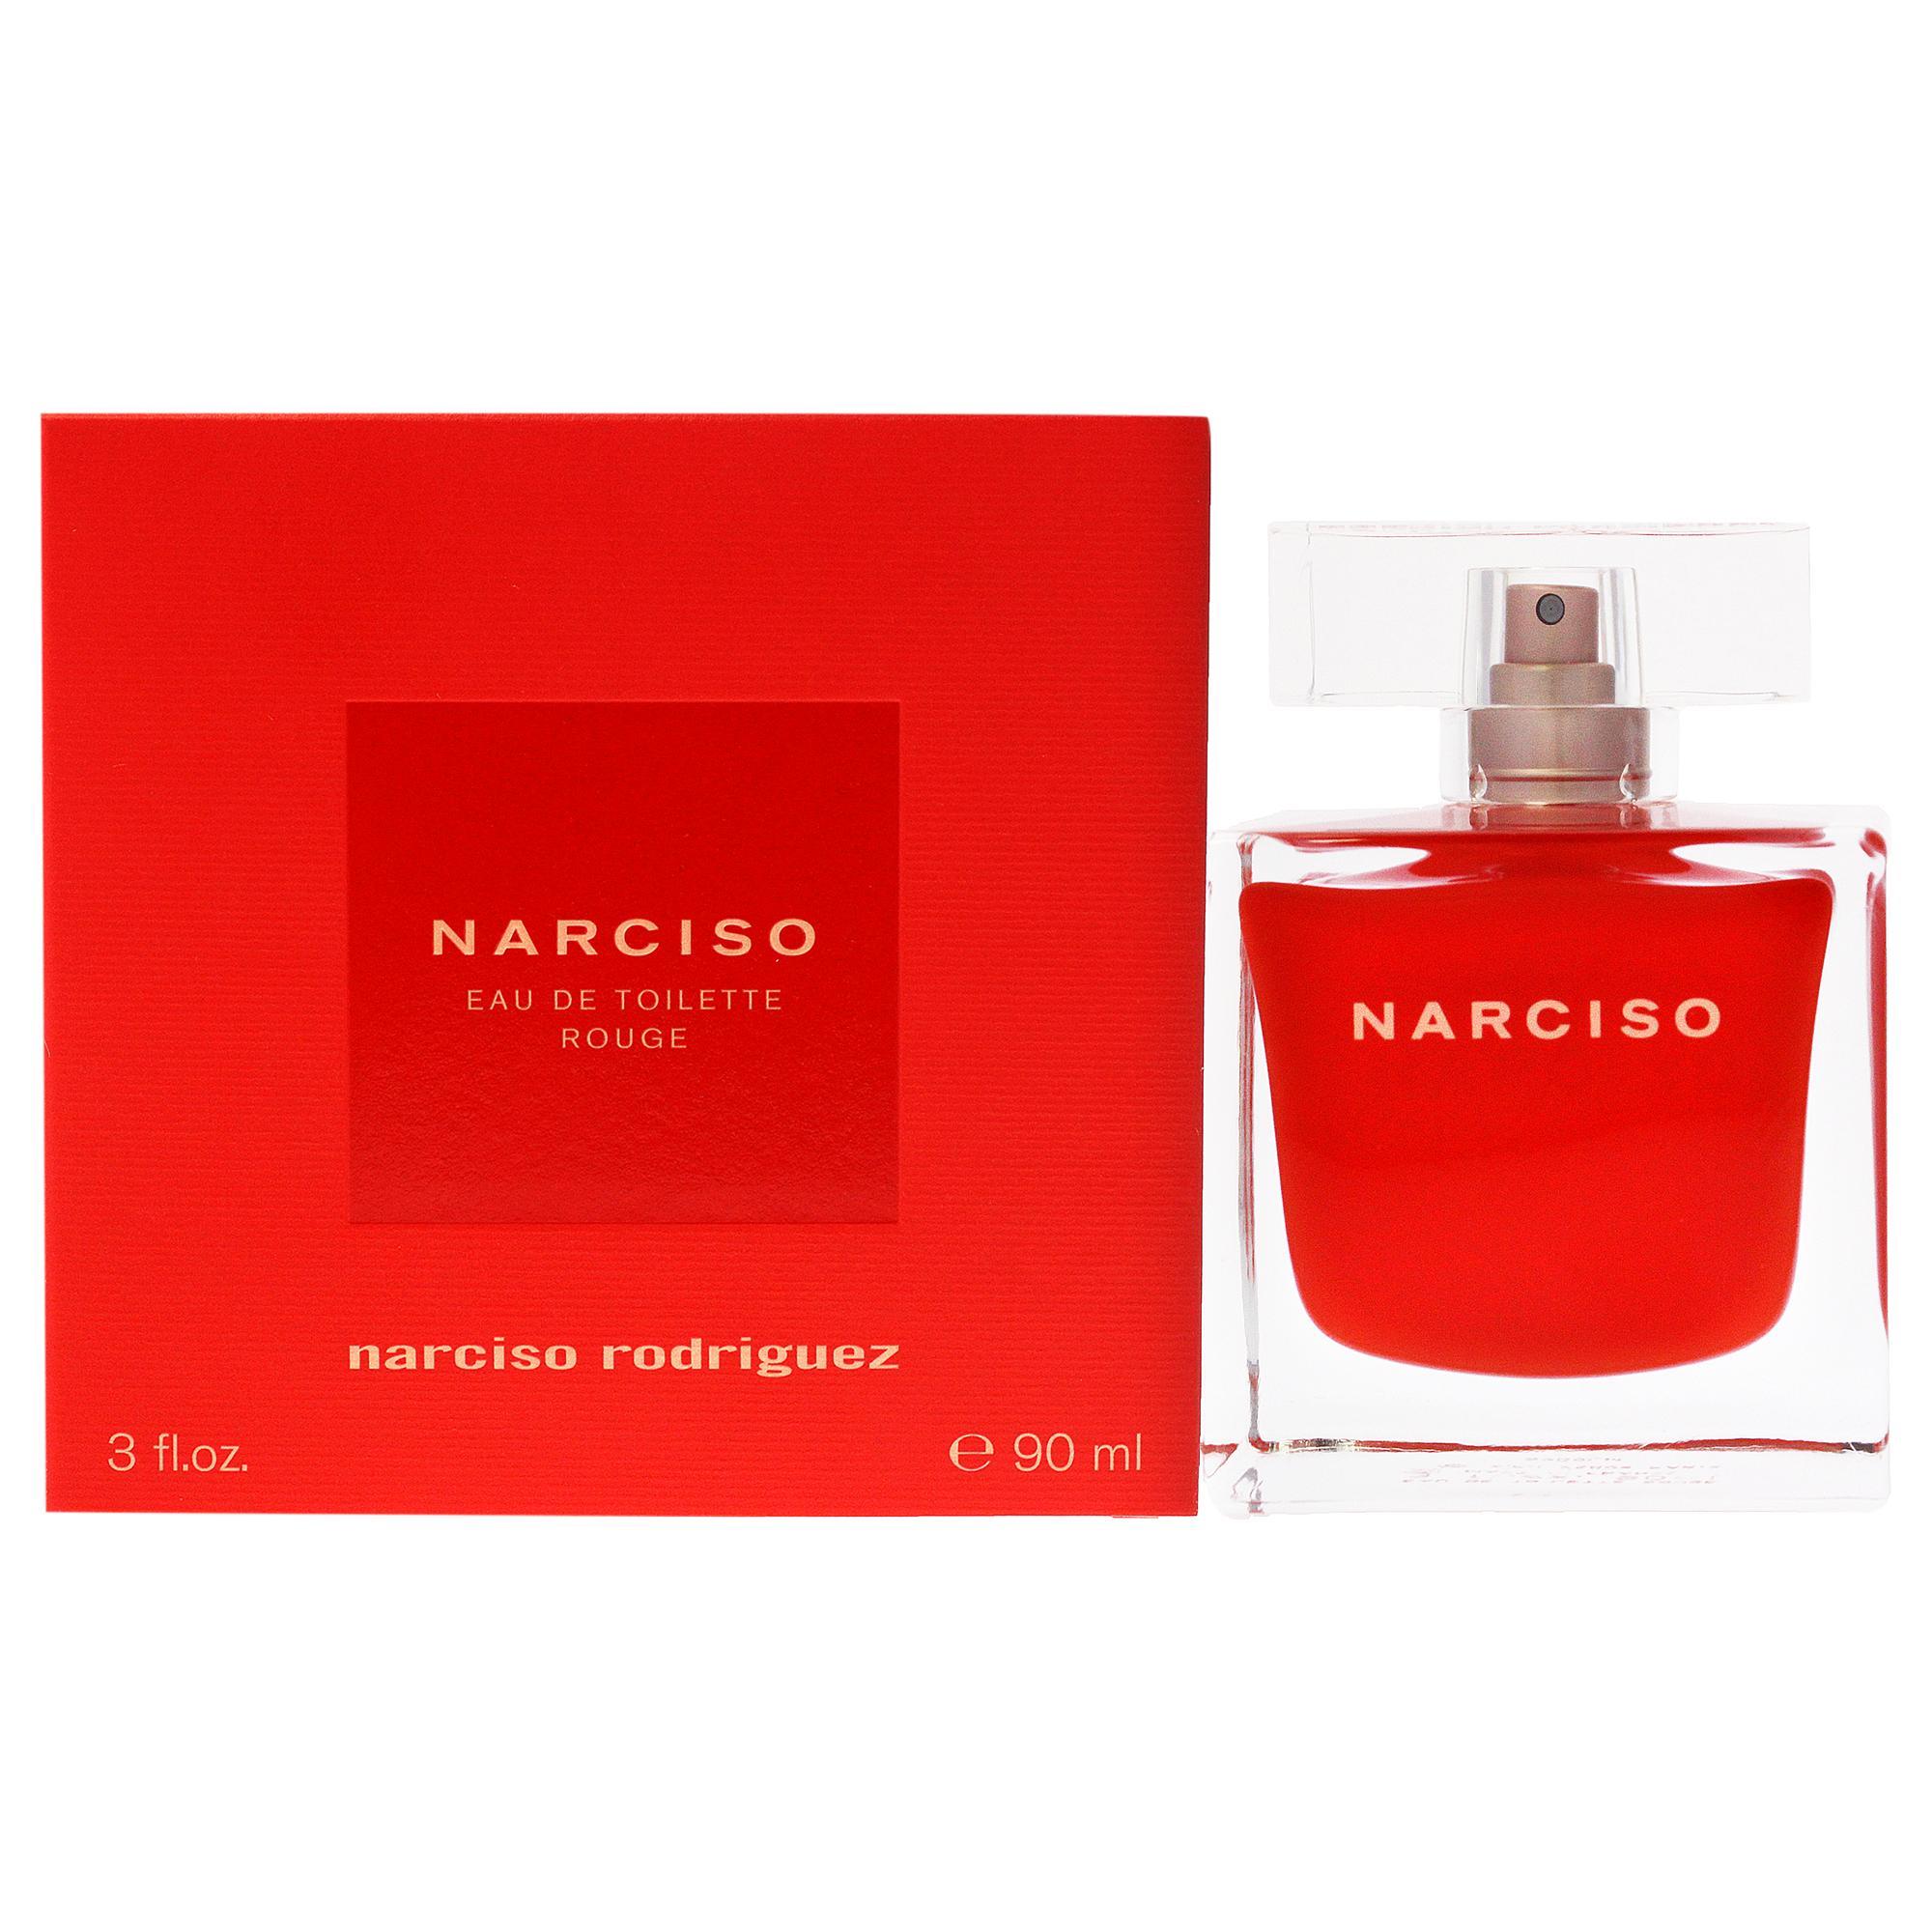 Narciso Rouge by Narciso Rodriguez for Women - 3 oz EDT Spray